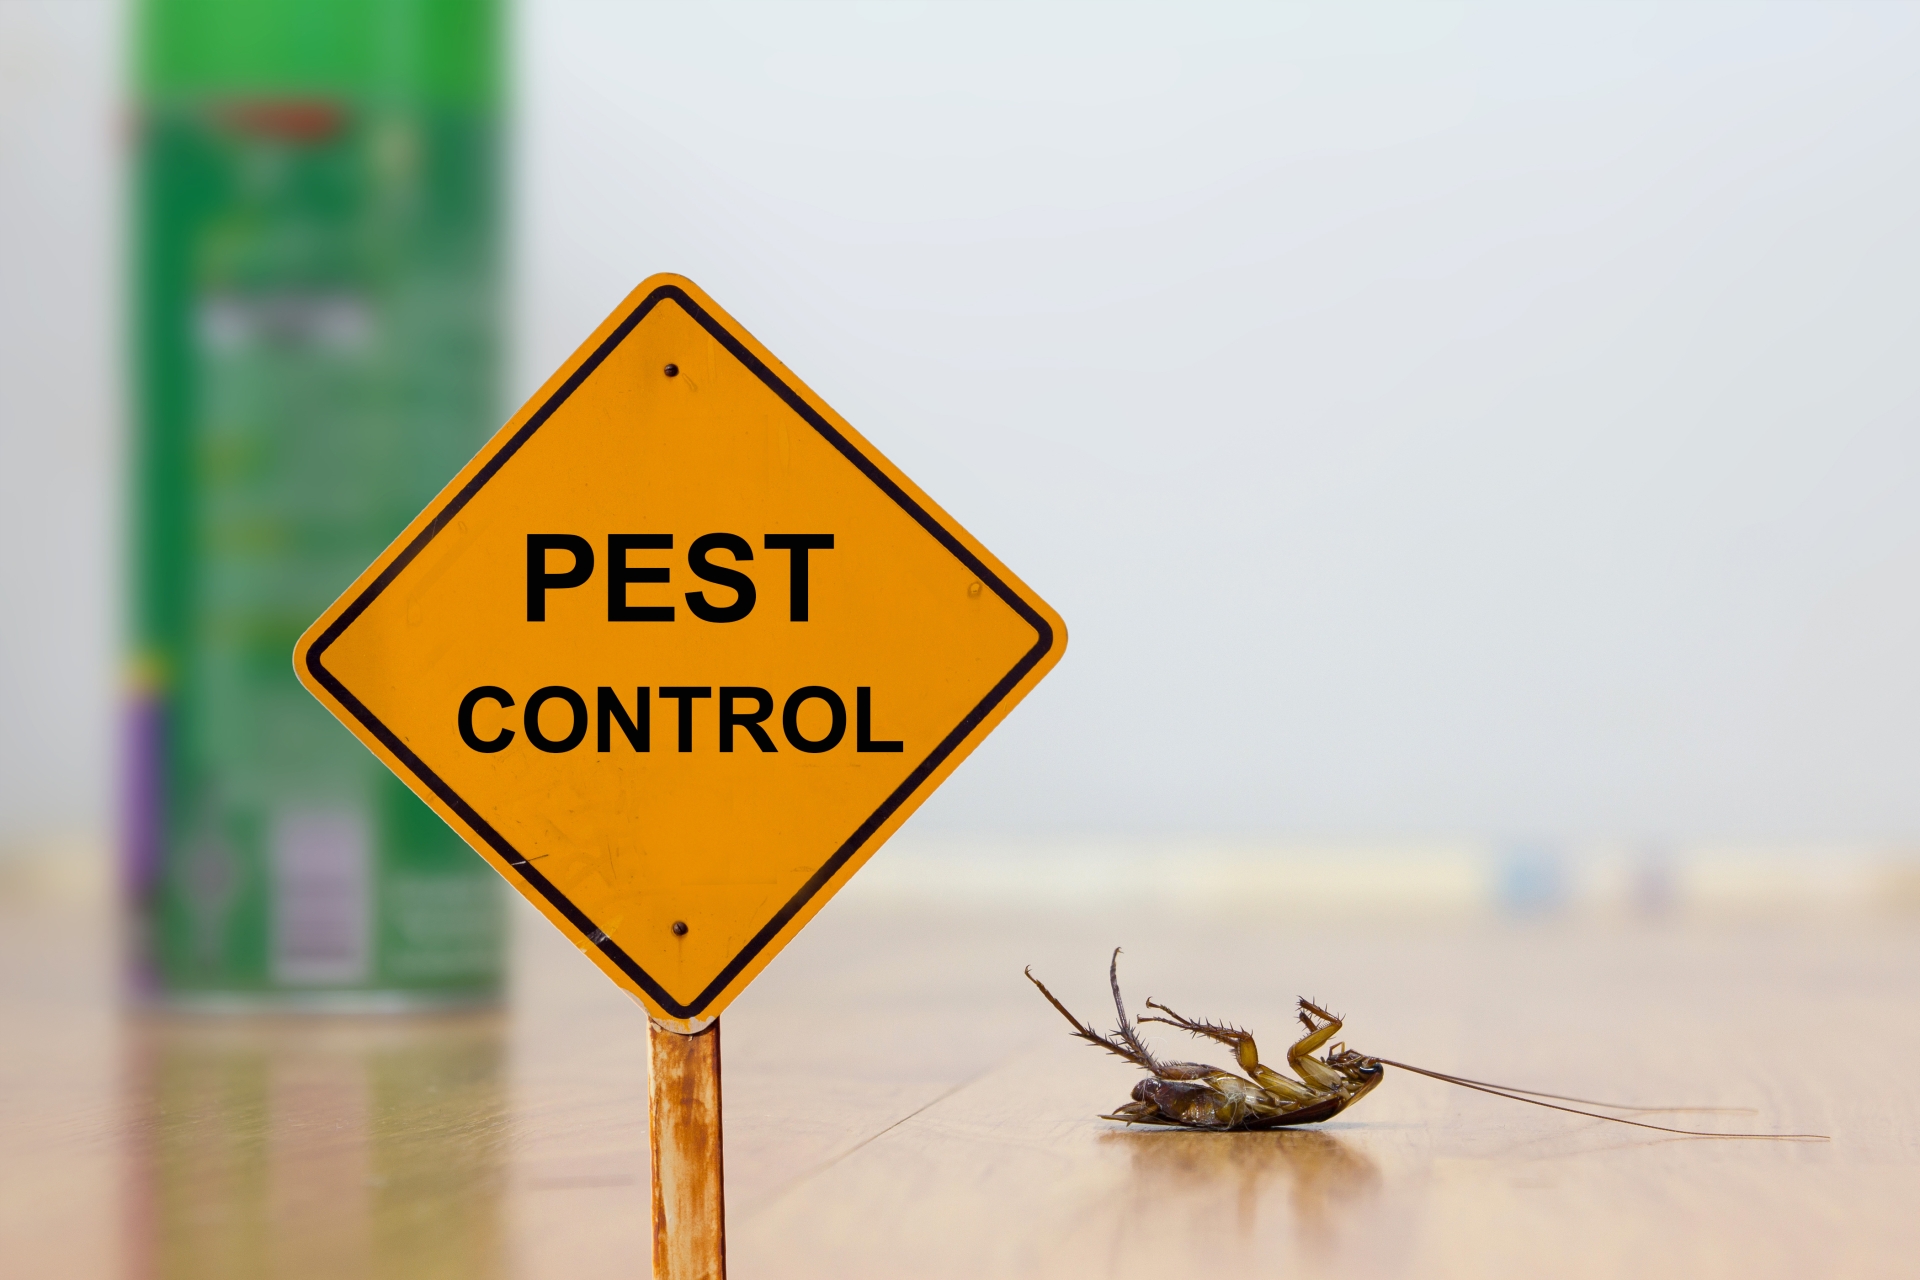 24 Hour Pest Control, Pest Control in Woodford Green, Woodford, IG8. Call Now 020 8166 9746